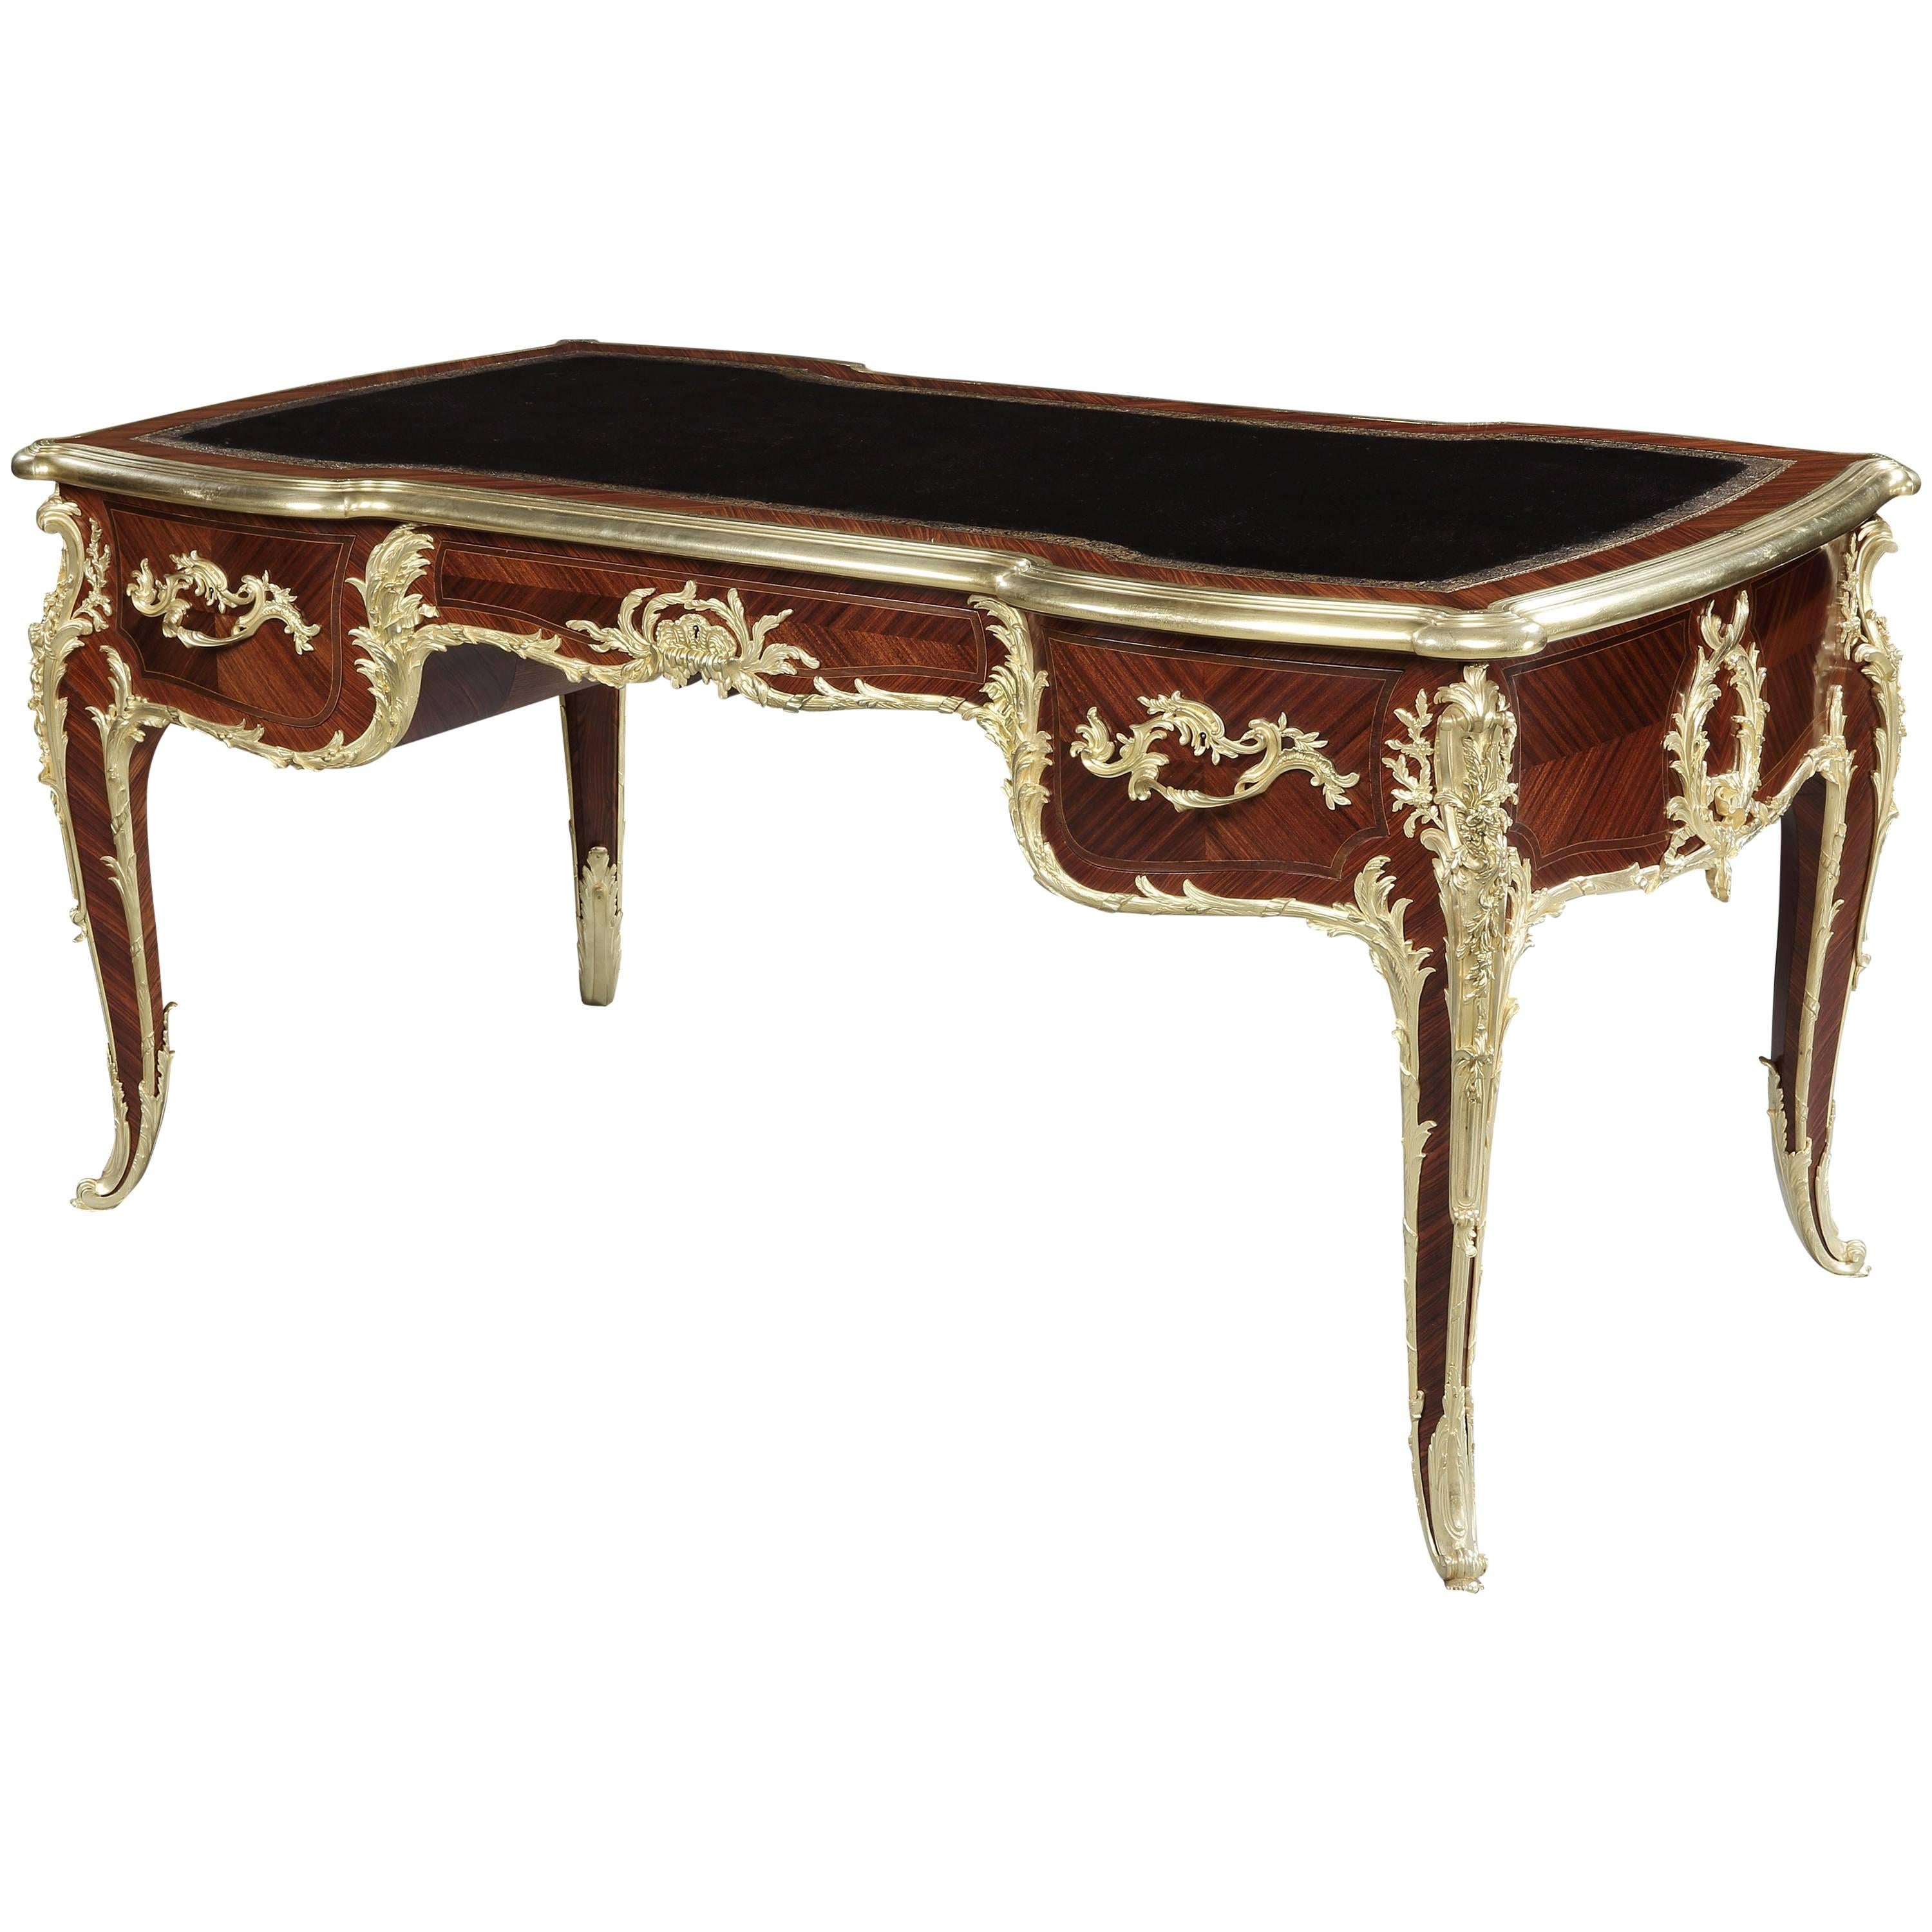 French Kingwood and Gilt Bronze-Mounted Bureau Plat with Leather Top